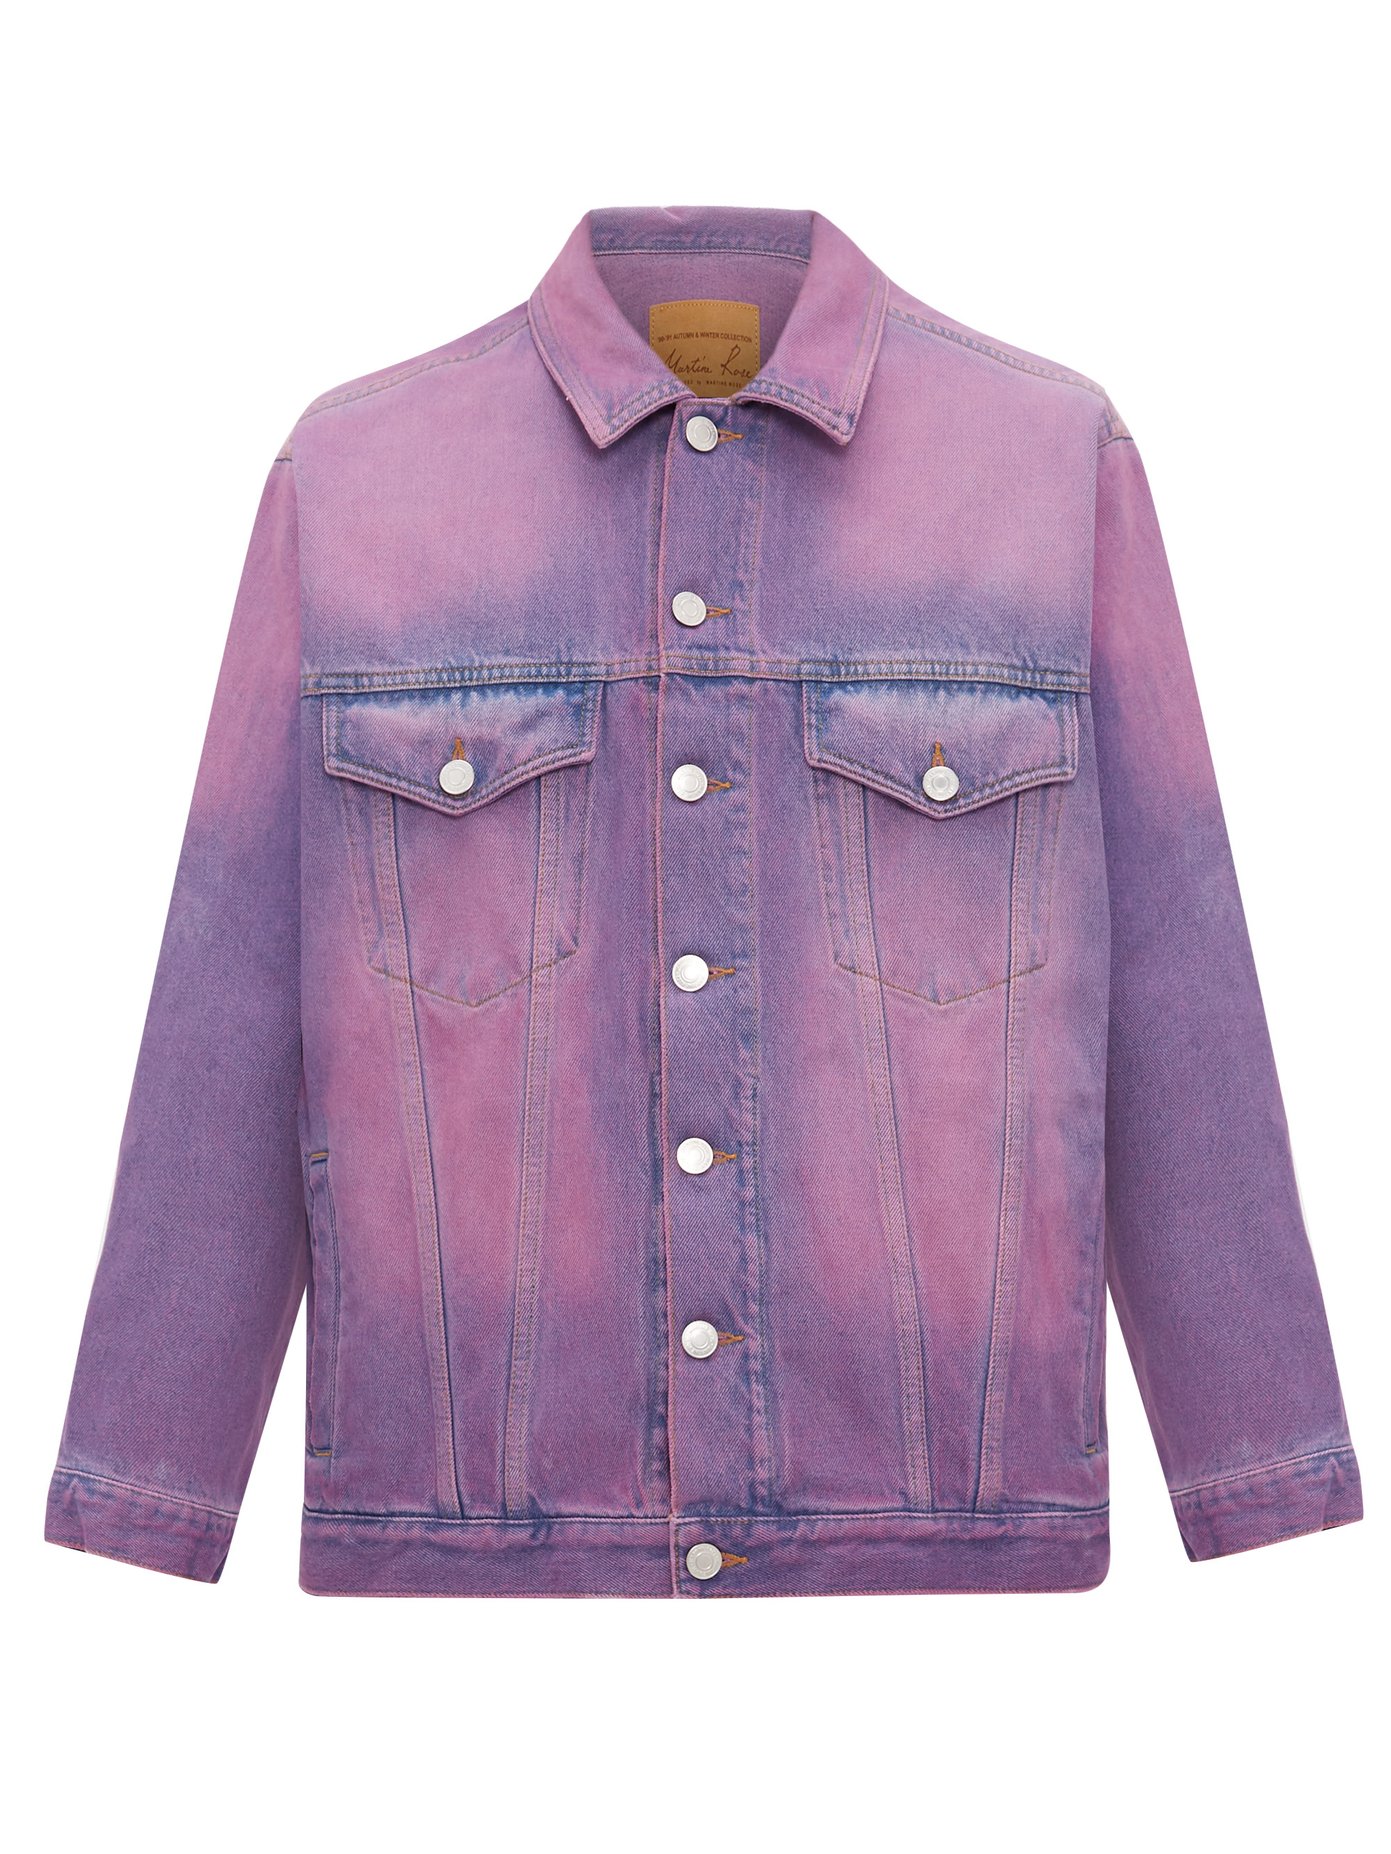 jean jacket with roses mens